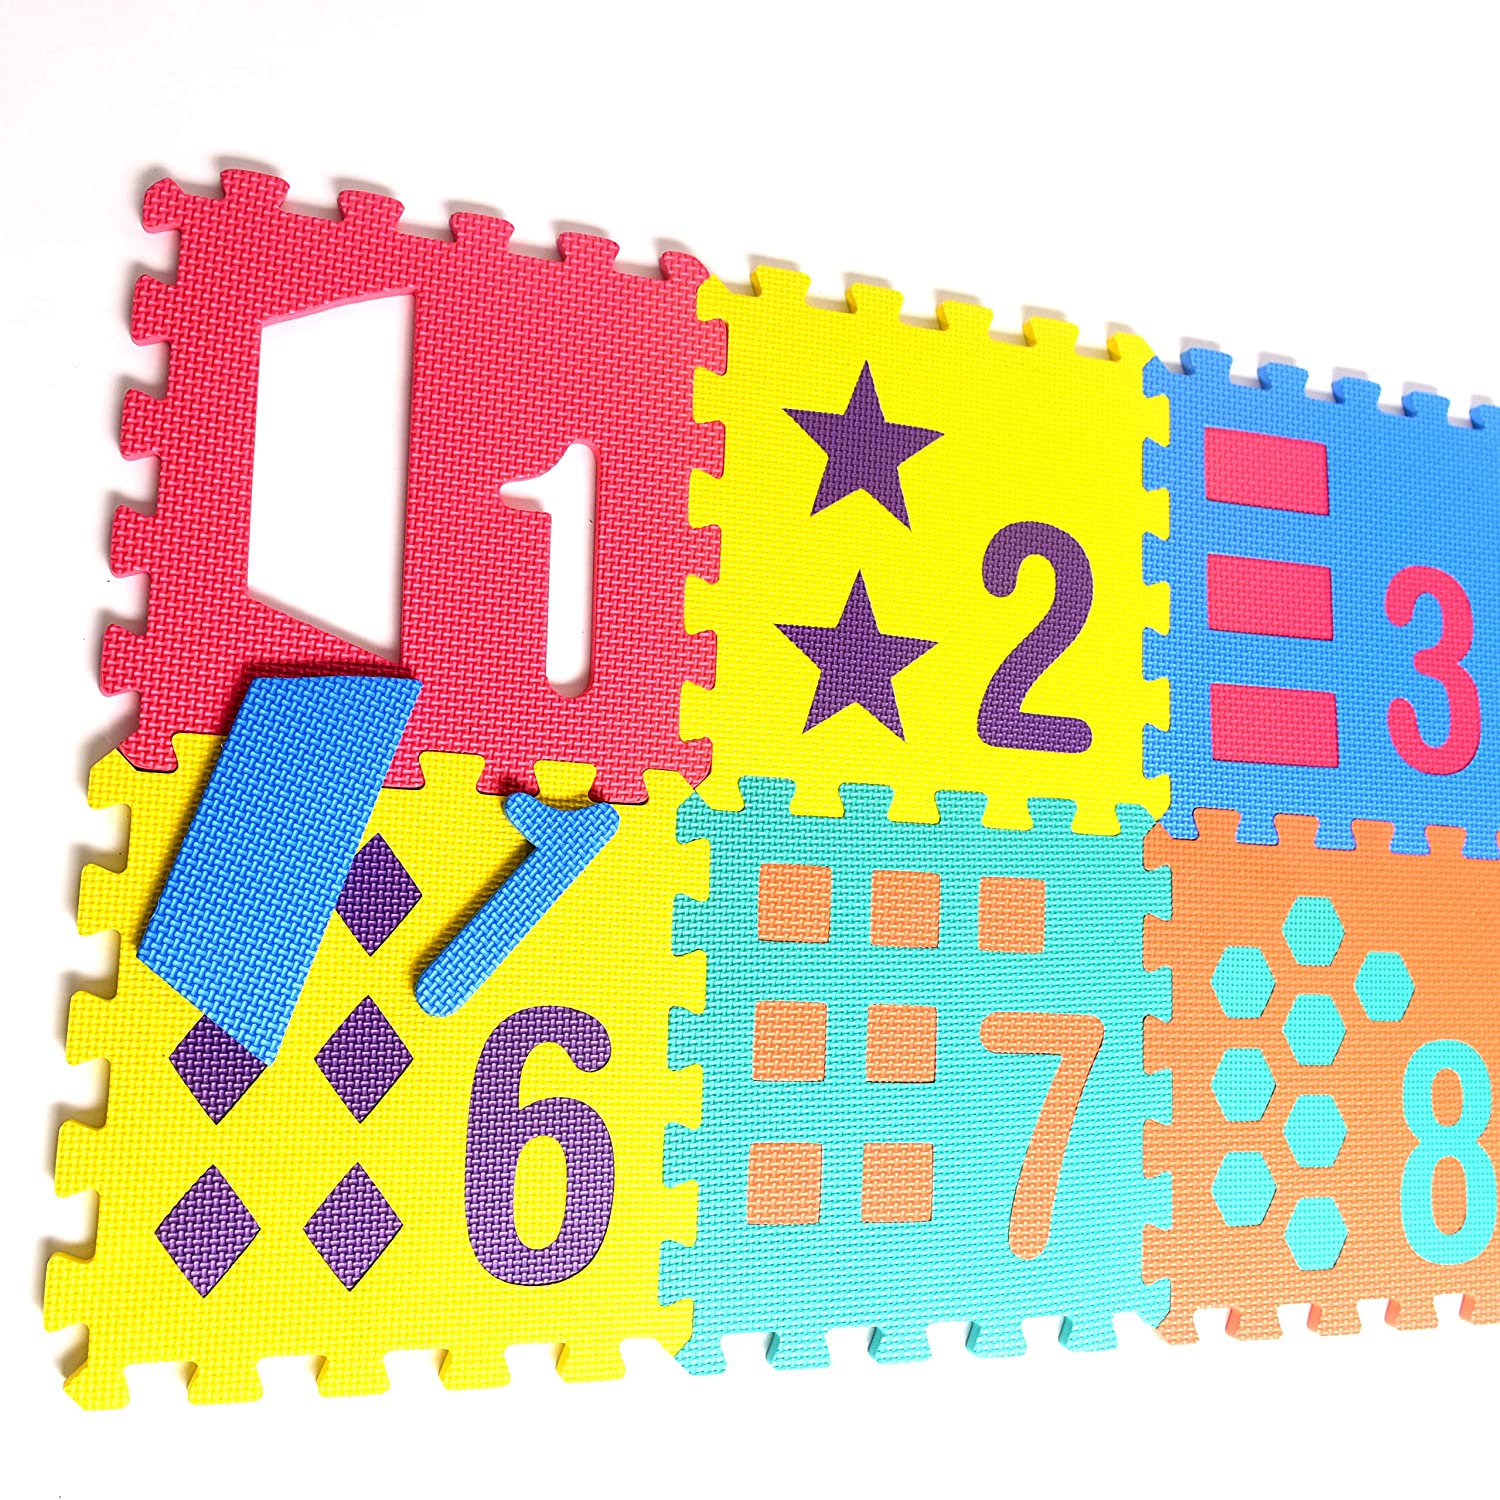 Ideal: Crawling Baby 9 Interlocking playmat Tiles Lovely Garden Rubber EVA Foam Puzzle Play mat Floor Gym Workout time Toddler Classroom Tile:12X12 Inch/9 Sq.feet Coverage Infant Kids 